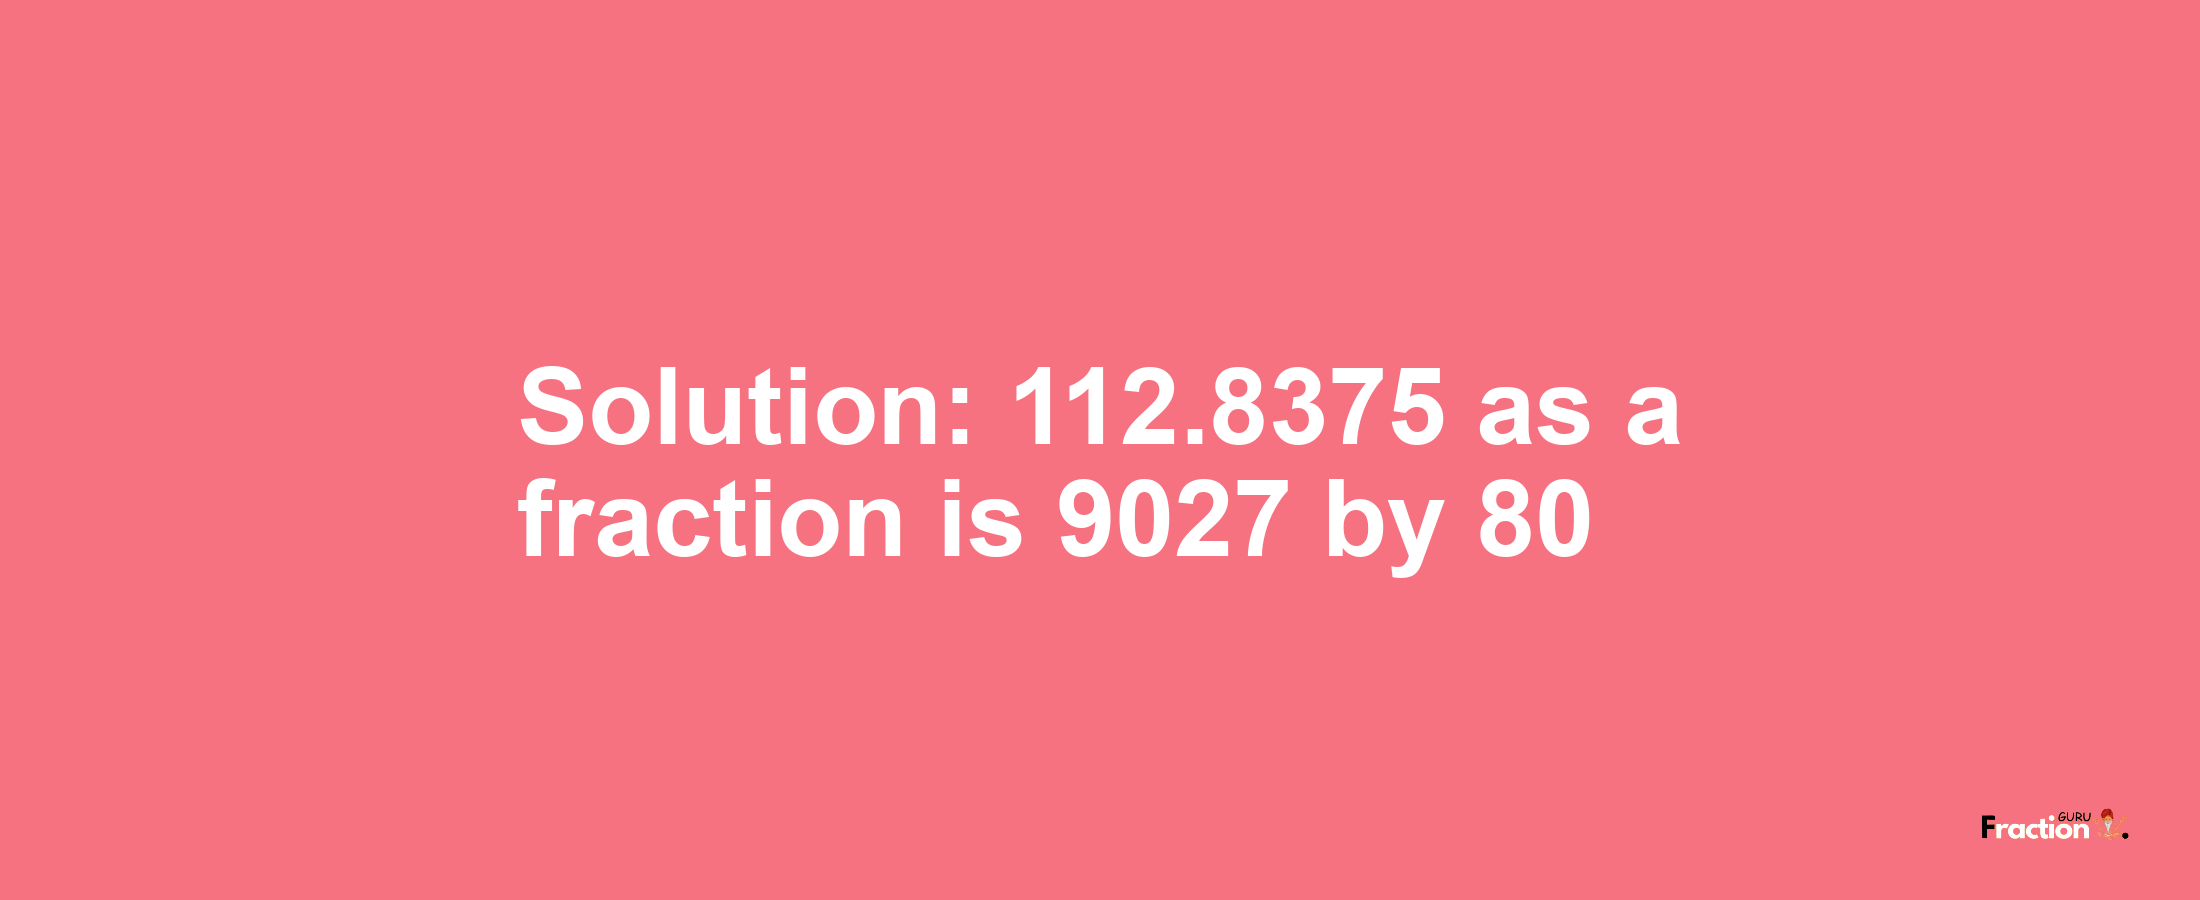 Solution:112.8375 as a fraction is 9027/80